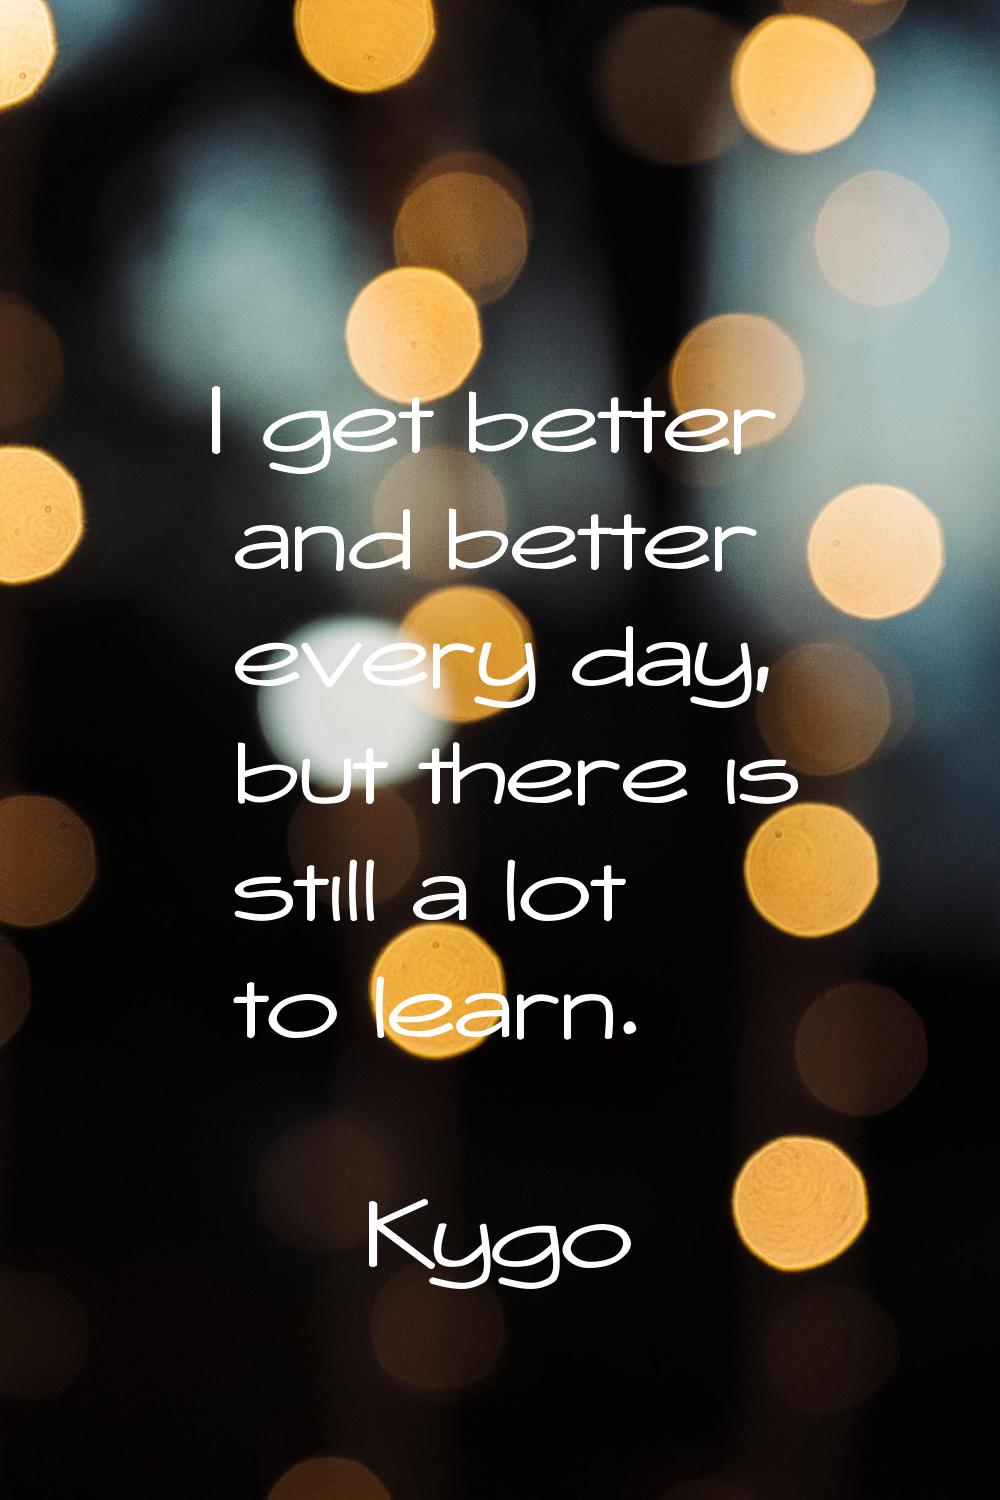 I get better and better every day, but there is still a lot to learn.